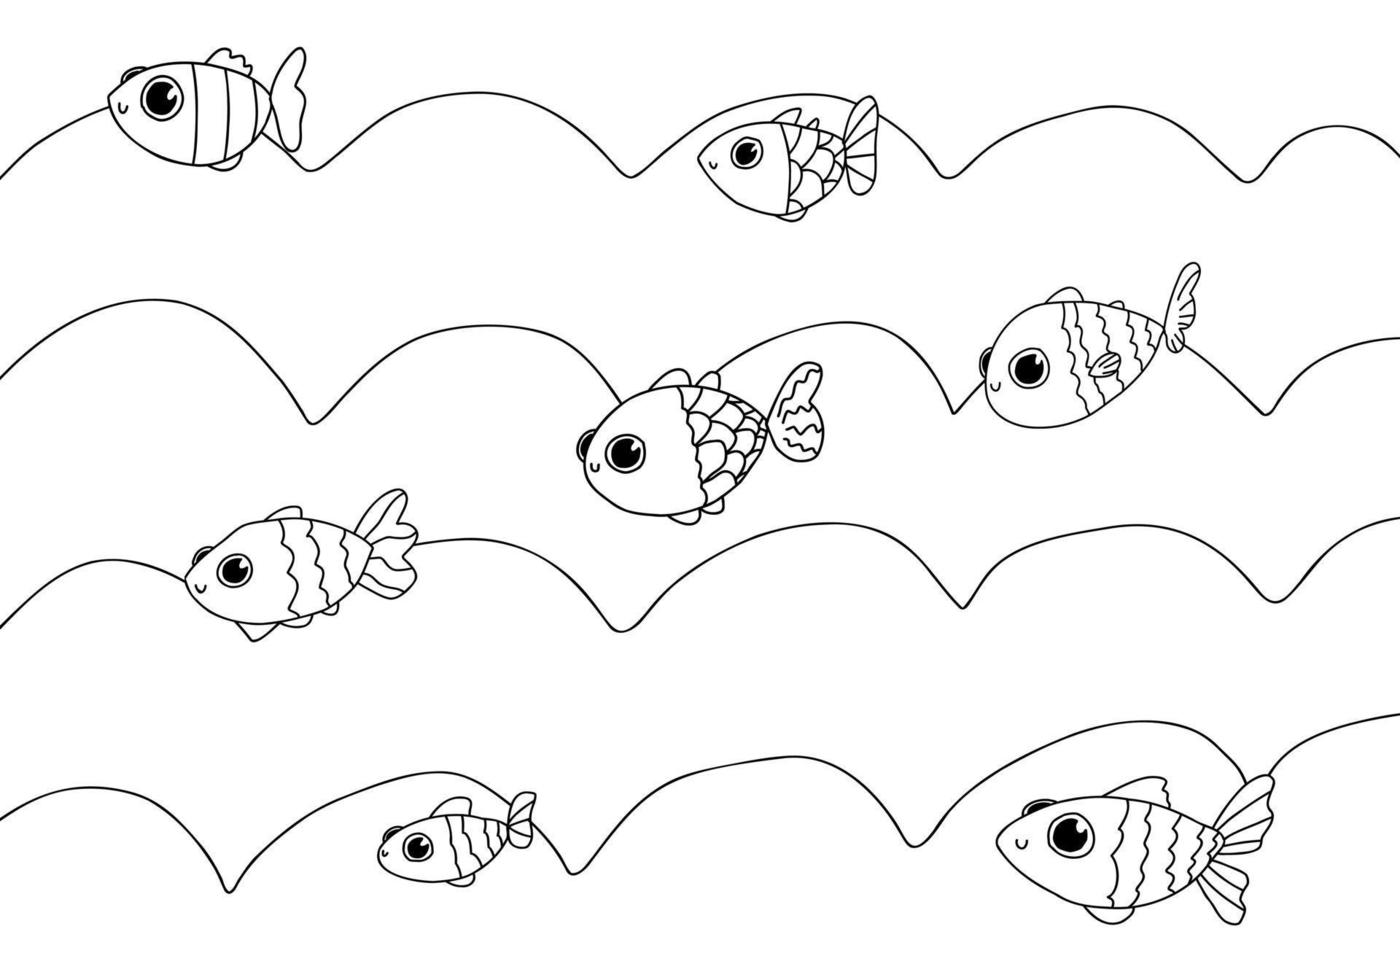 Cute cartoon fish coloring book. Sea, waves, nature isolated background. vector